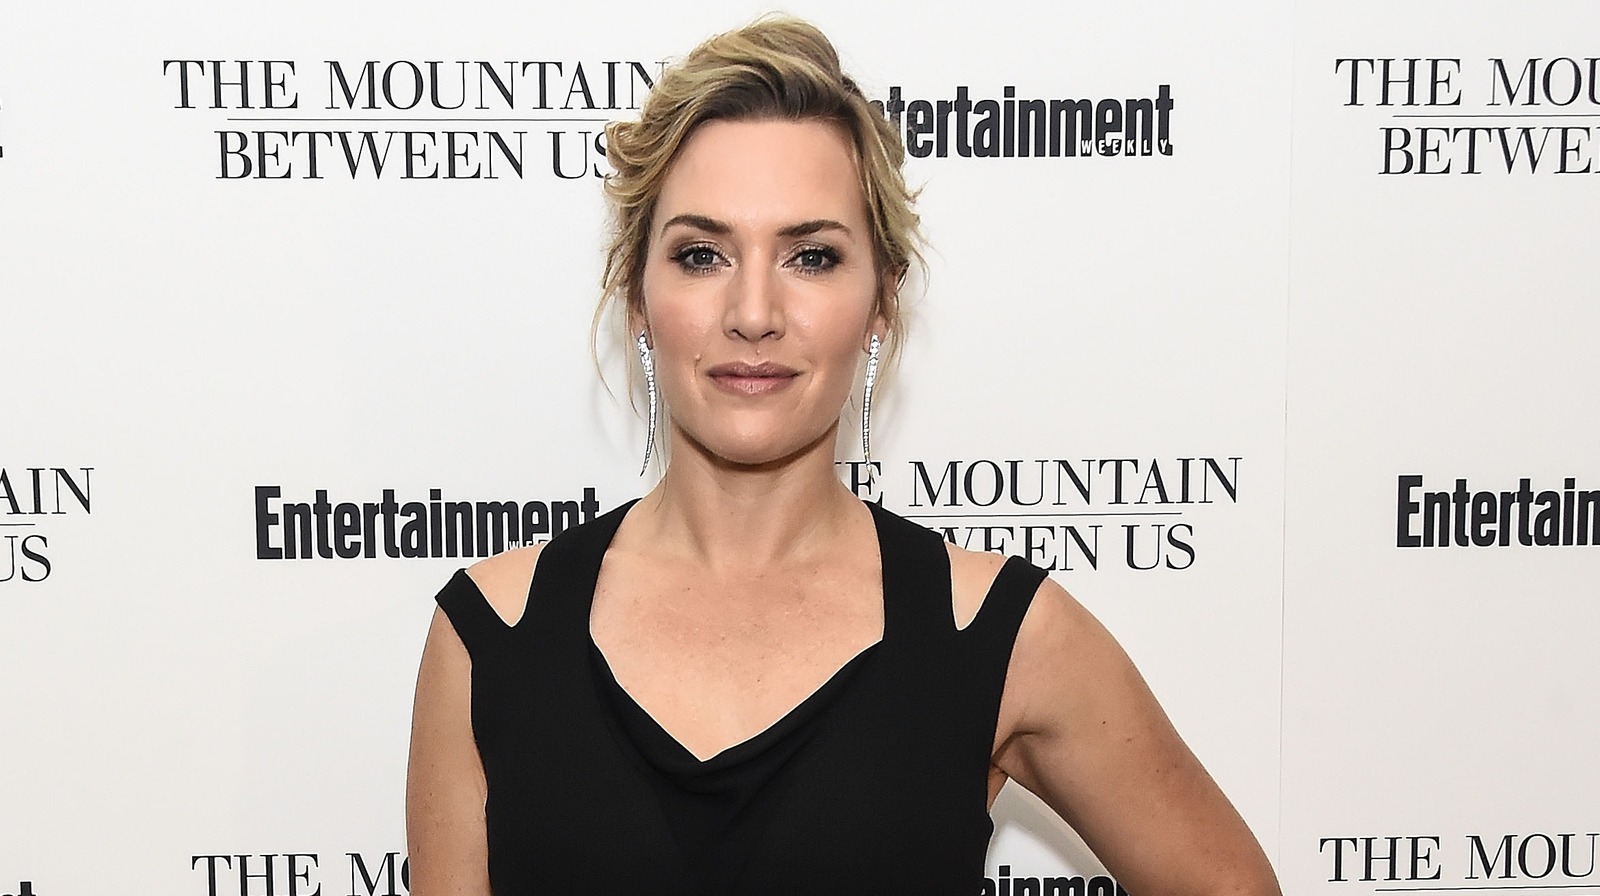 alan wareham recommends kate winslet drawing scene pic